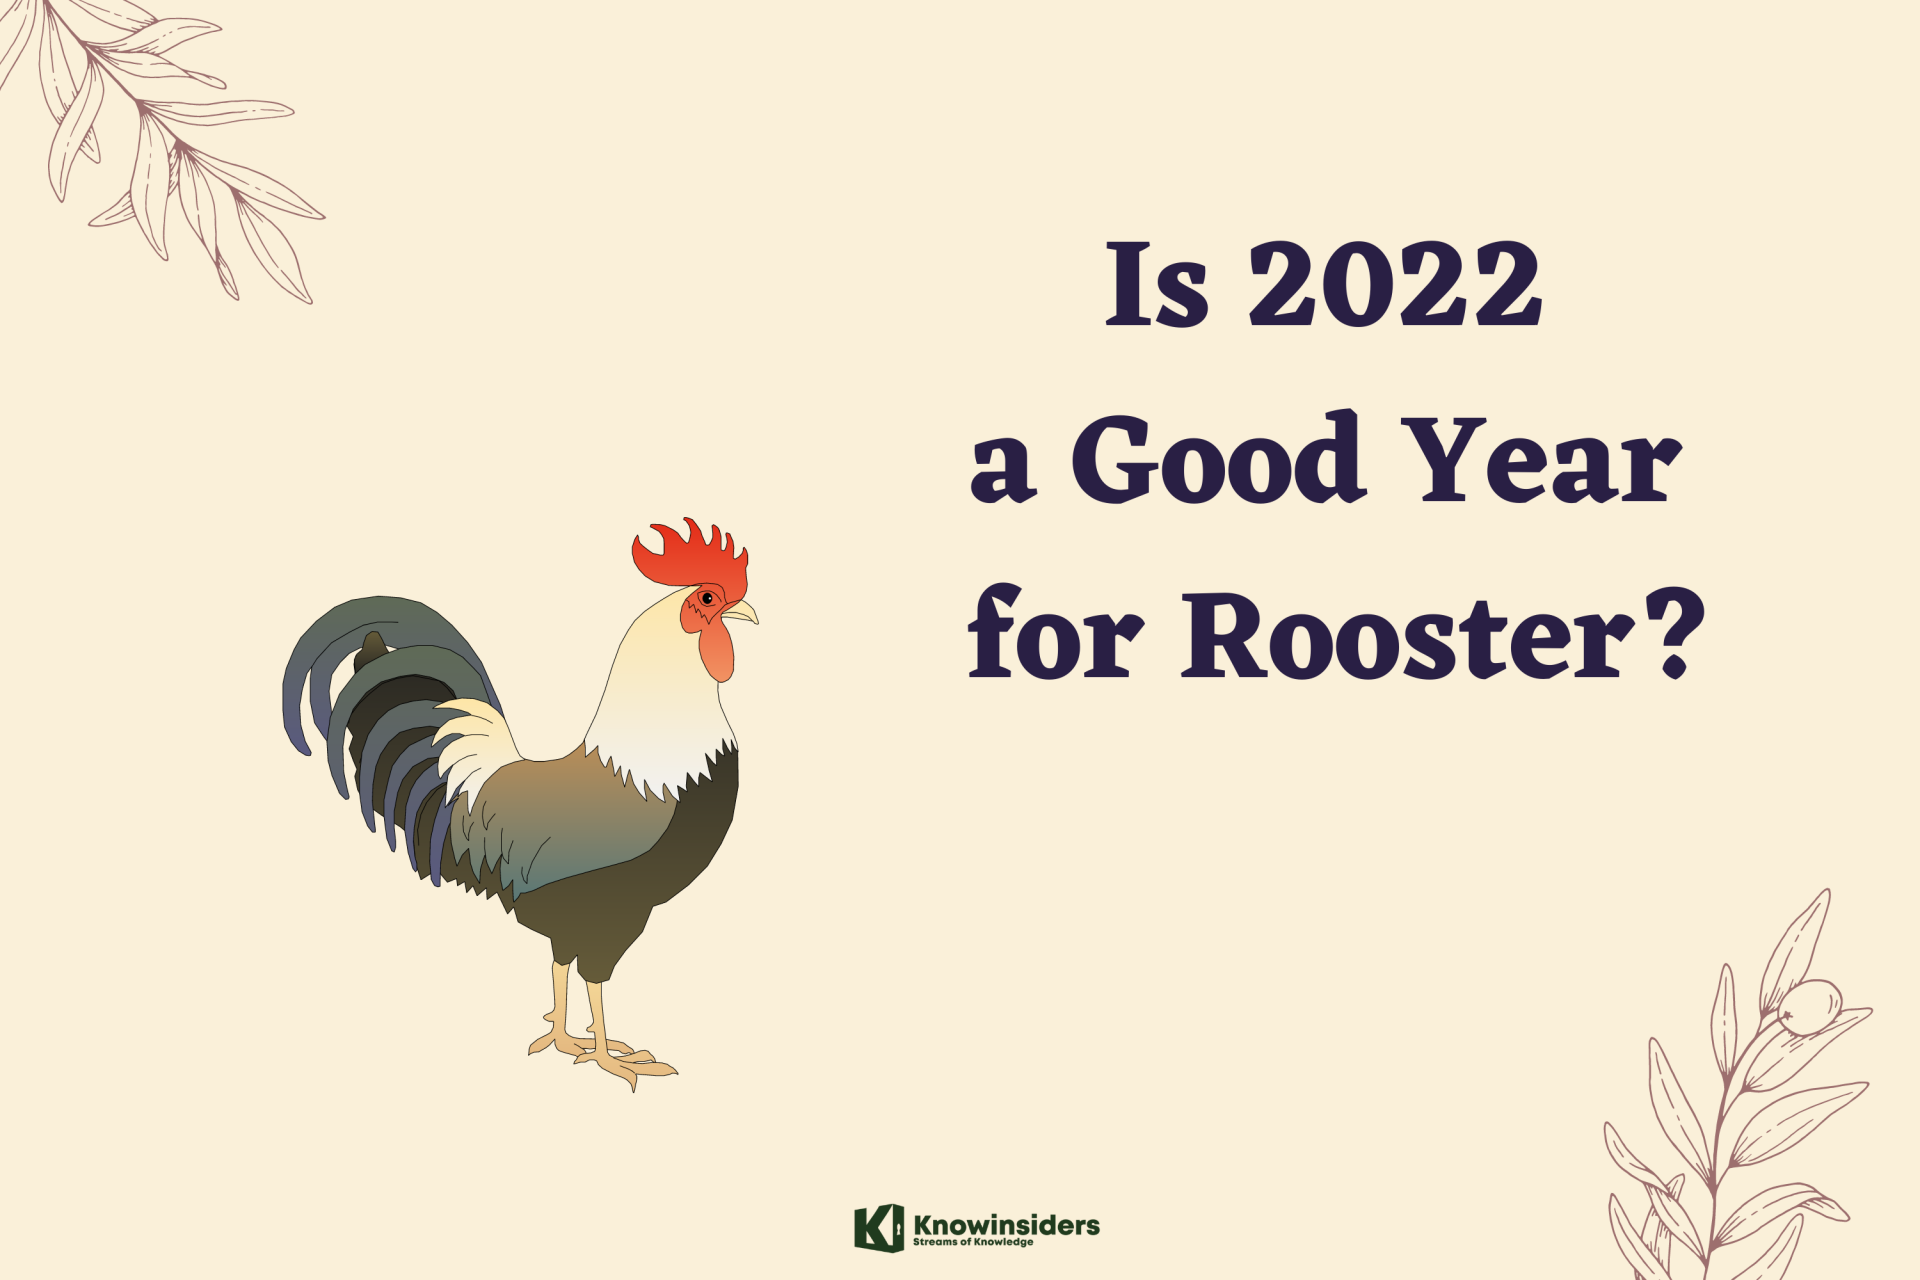 Is 2022 A Good Year for Rooster?